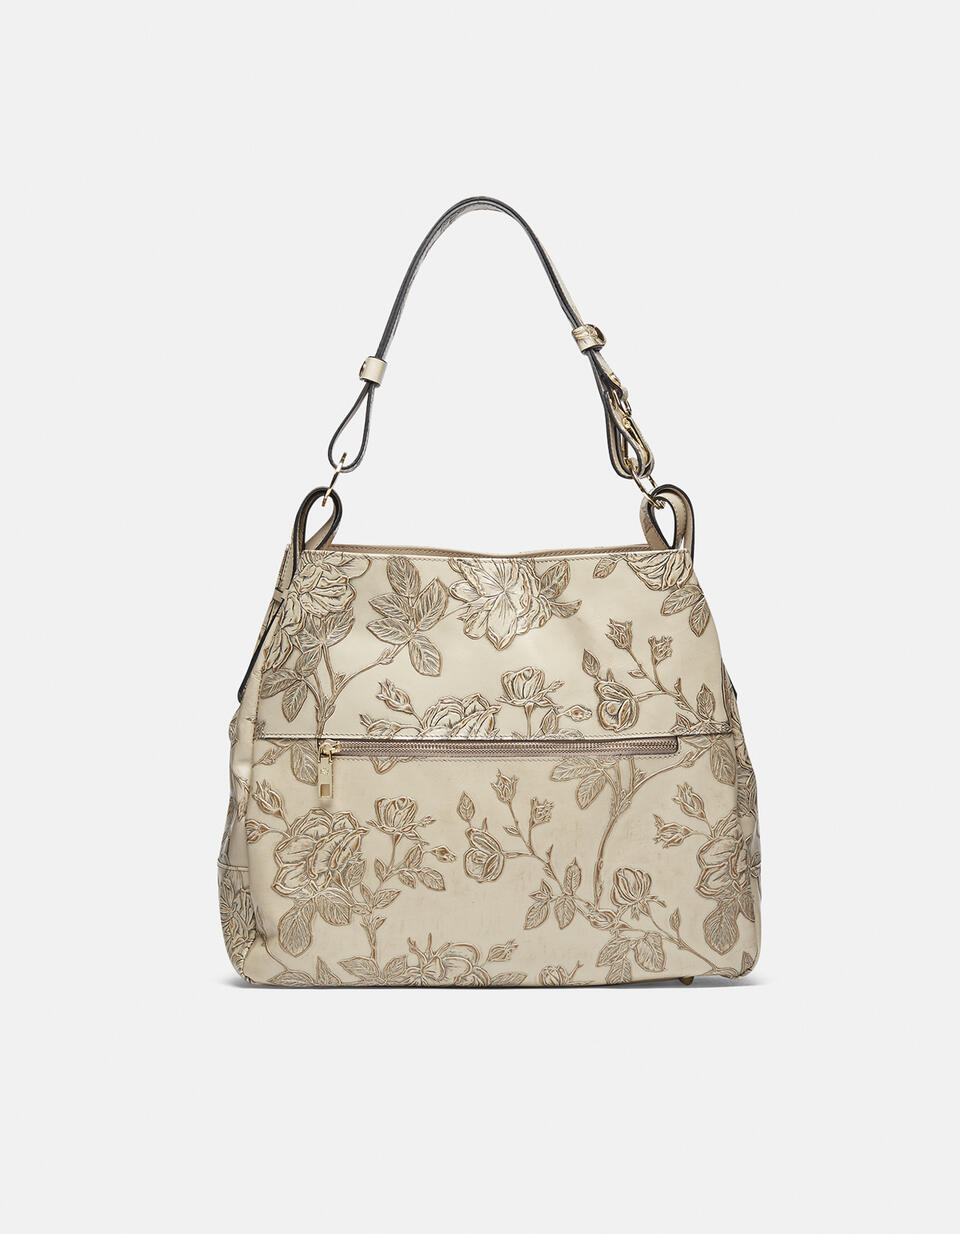 Large bag with shoulder strap - Shoulder Bags - WOMEN'S BAGS | bags Mimì TAUPE - Shoulder Bags - WOMEN'S BAGS | bagsCuoieria Fiorentina